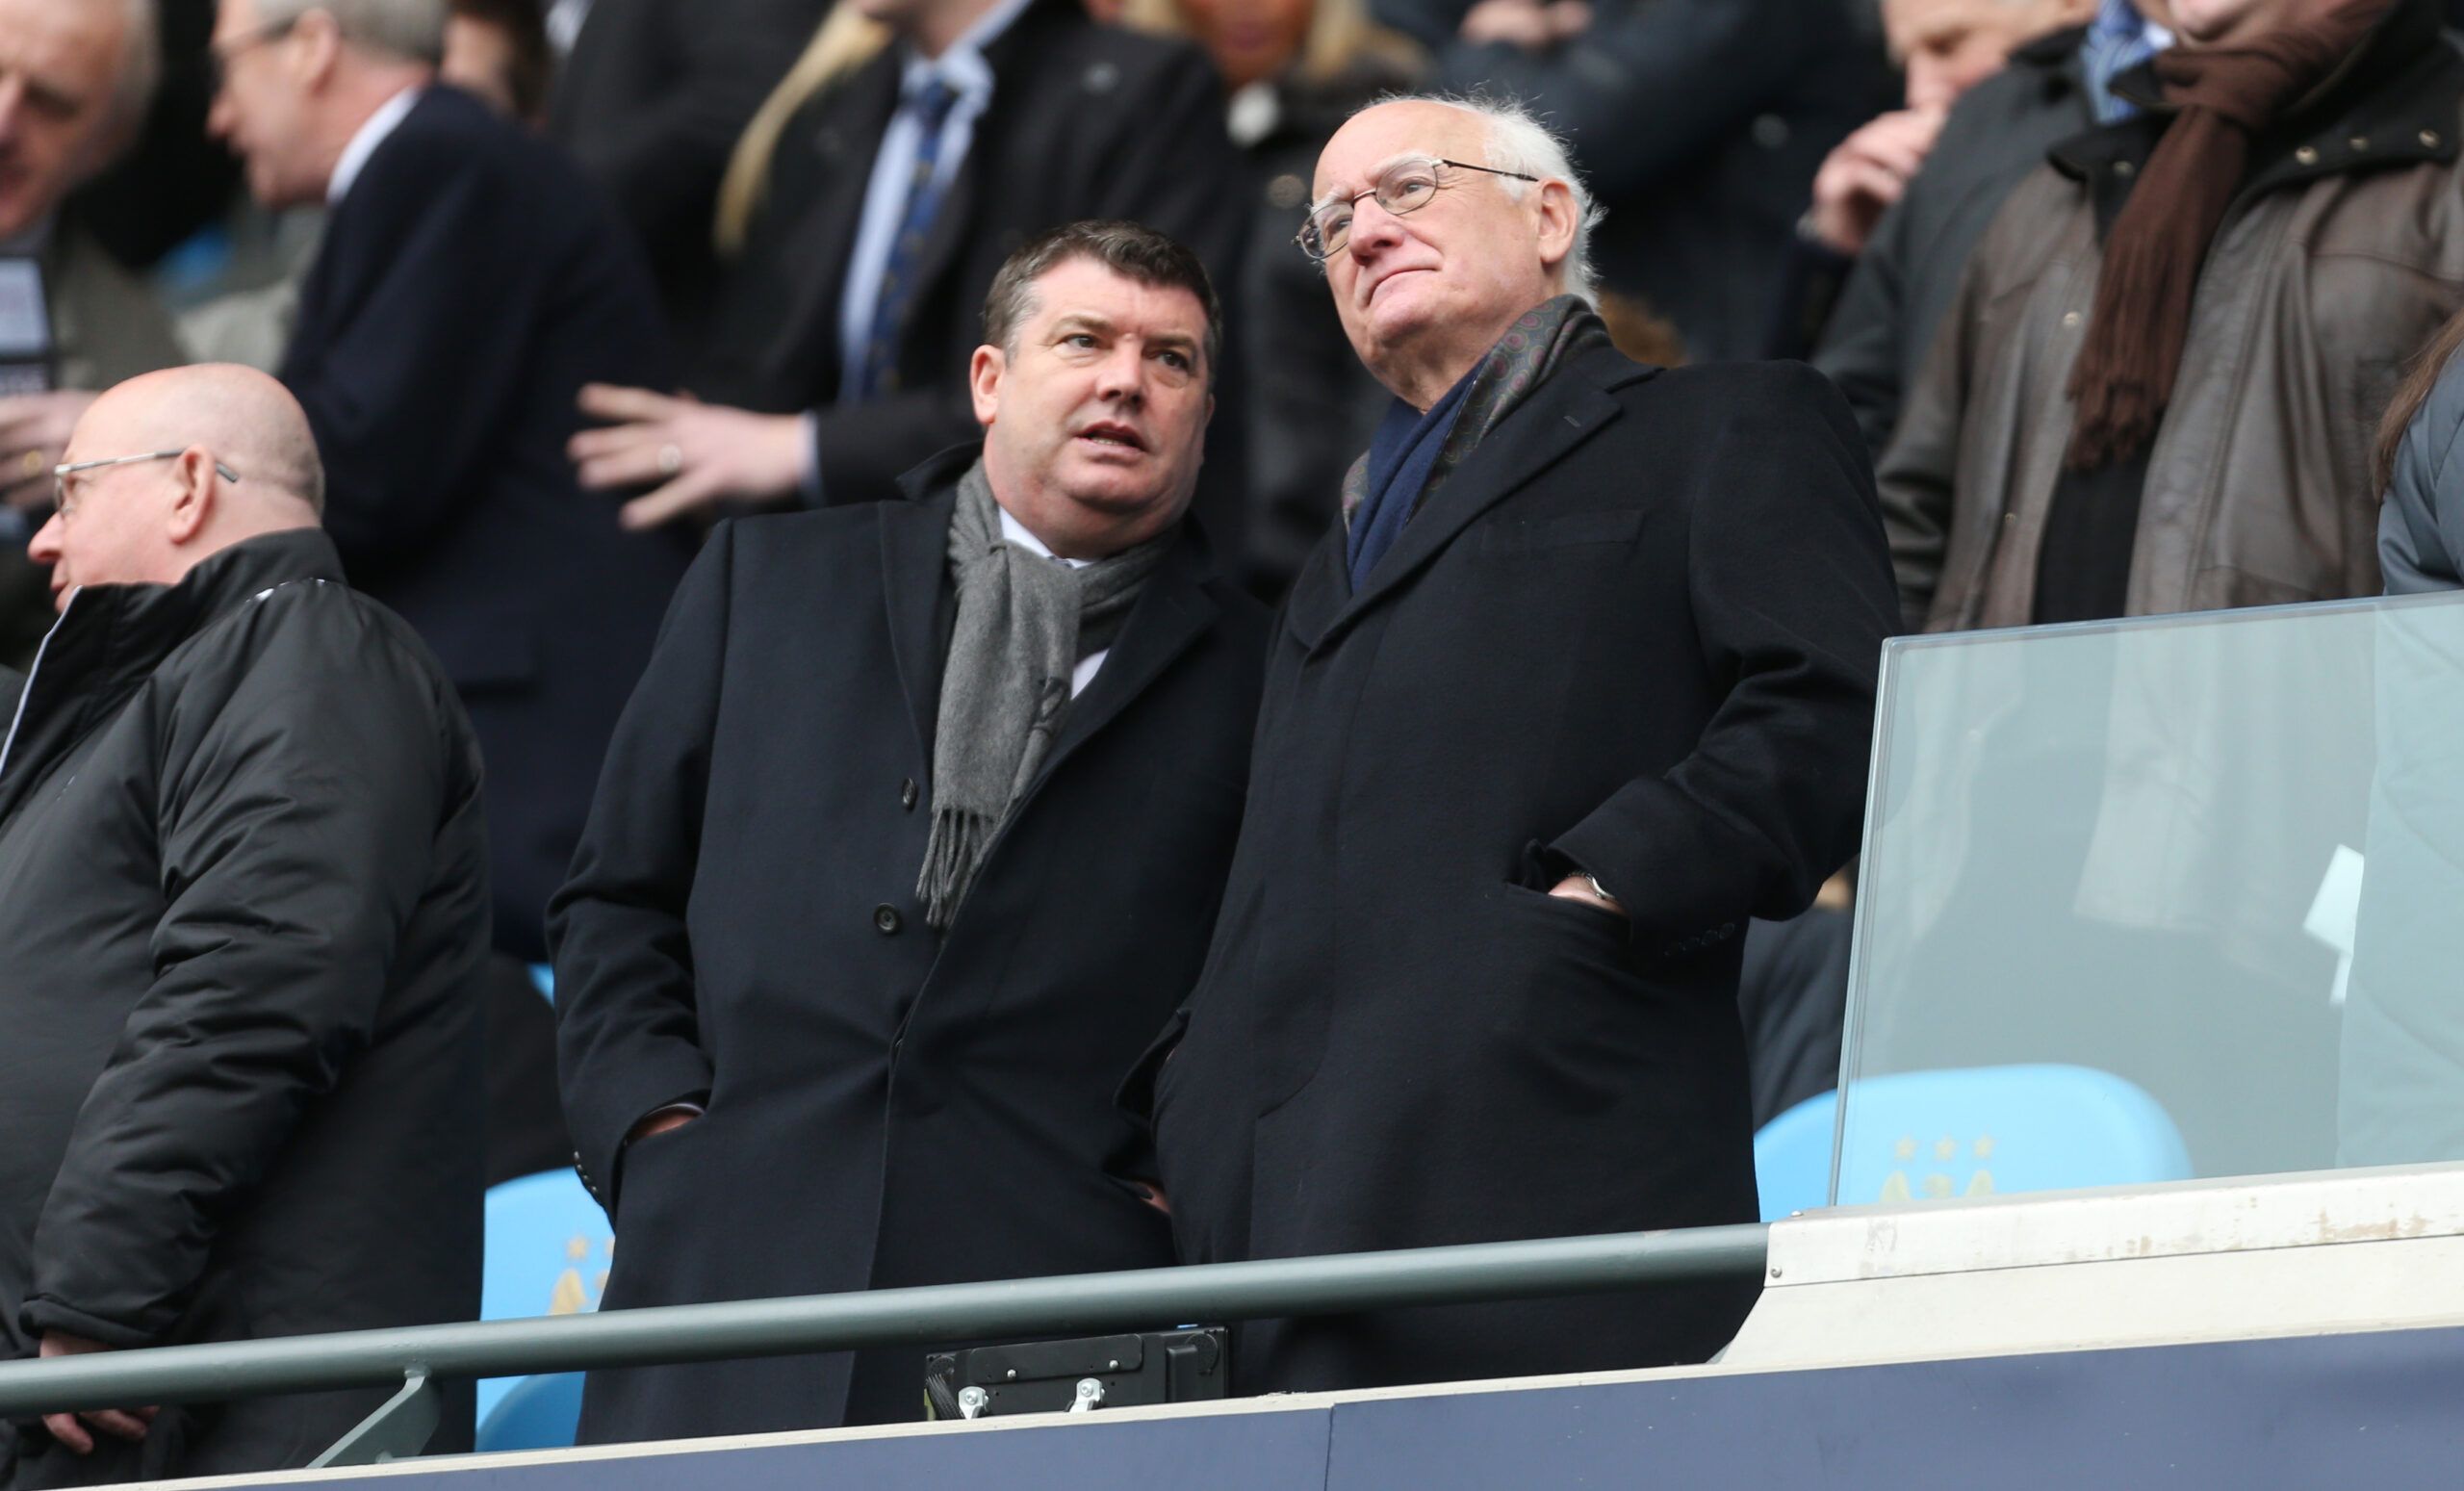 Football - Manchester City v Chelsea - Barclays Premier League  - Etihad Stadium - 12/13 - 24/2/13 
Chelsea chief executive Ron Gourlay (L) and Chelsea chairman Bruce Buck  
Mandatory Credit: Action Images / Lee Smith 
EDITORIAL USE ONLY. No use with unauthorized audio, video, data, fixture lists, club/league logos or live services. Online in-match use limited to 45 images, no video emulation. No use in betting, games or single club/league/player publications.  Please contact your account repres